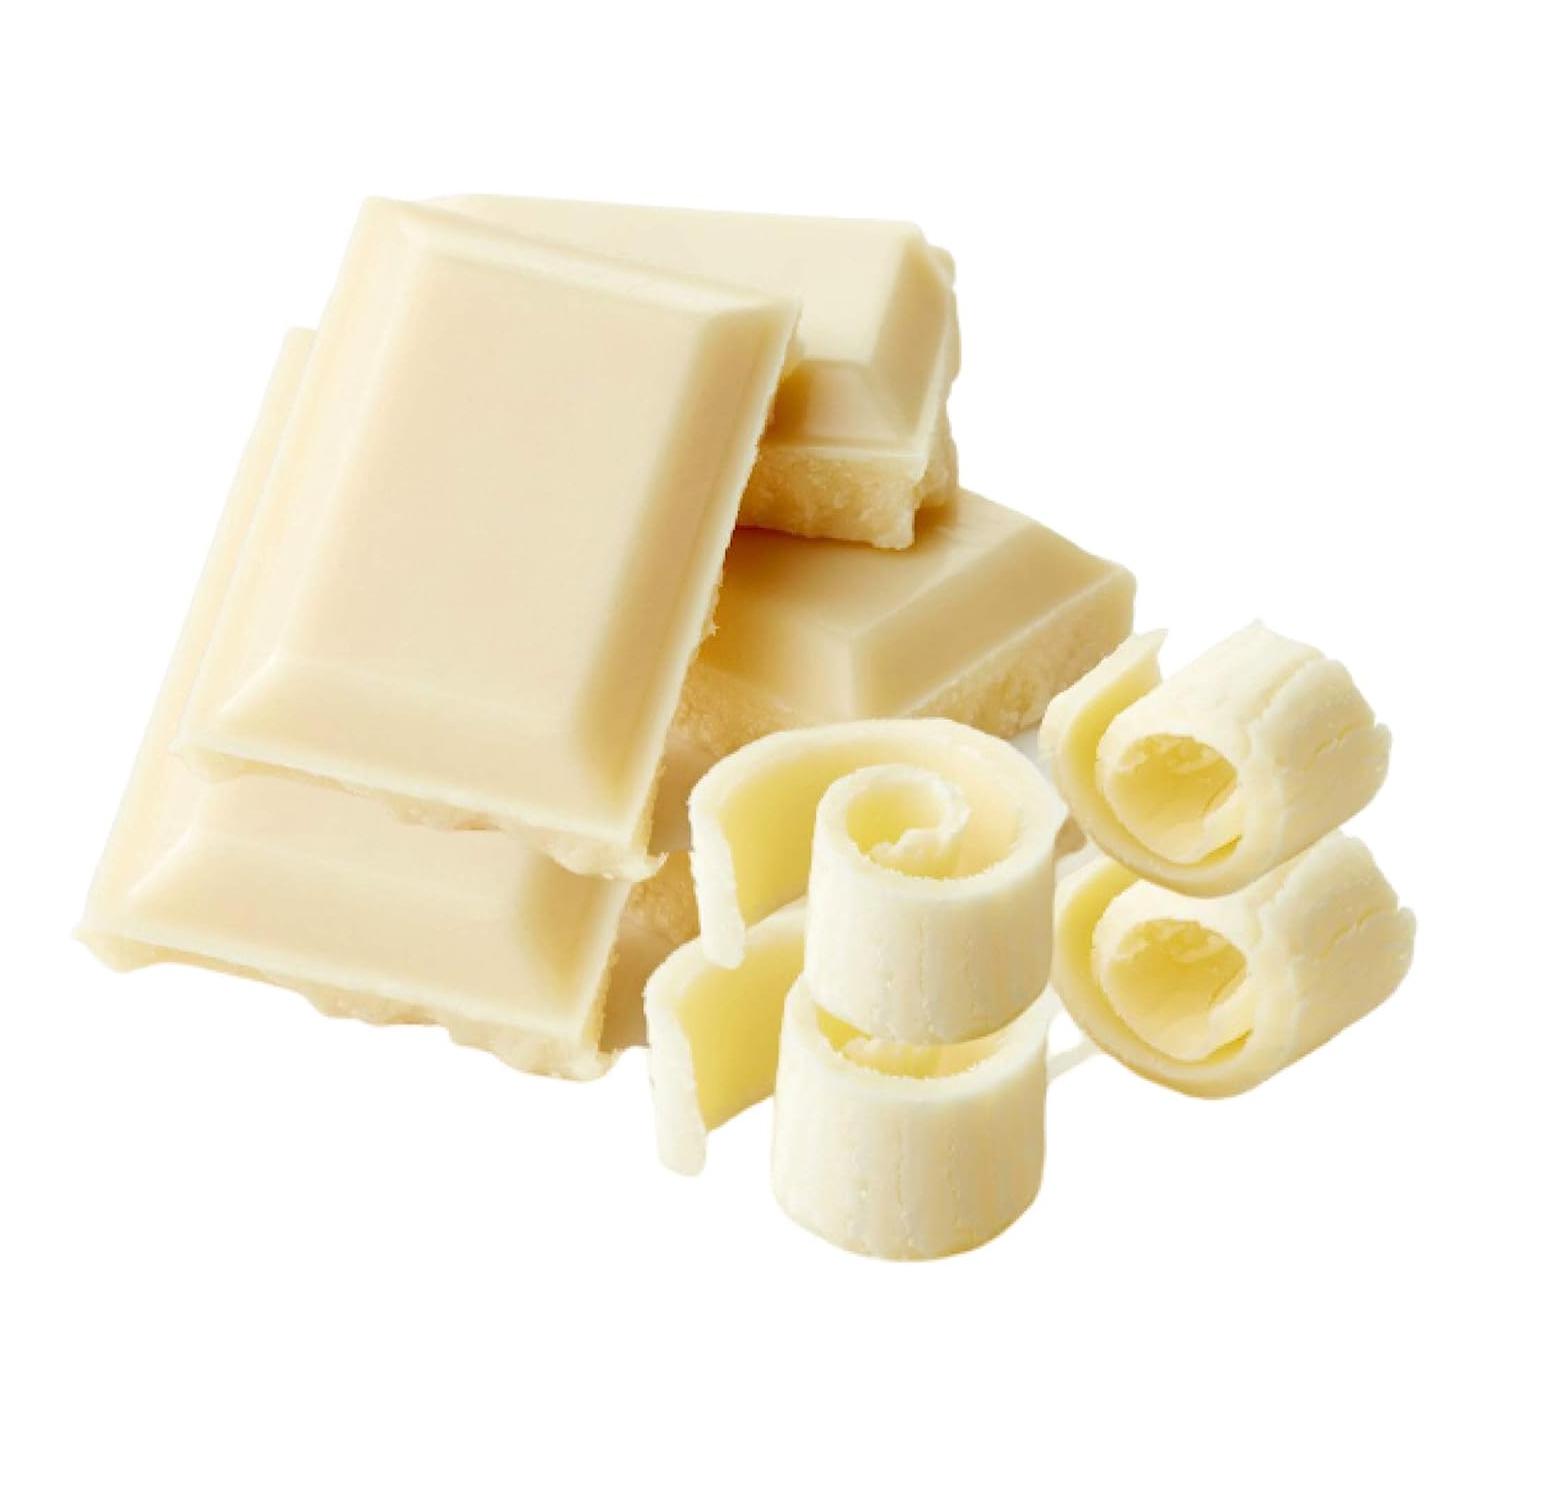 LYONS MAID WHITE CHOCOLATE COMPOUND PACKED 500GMS